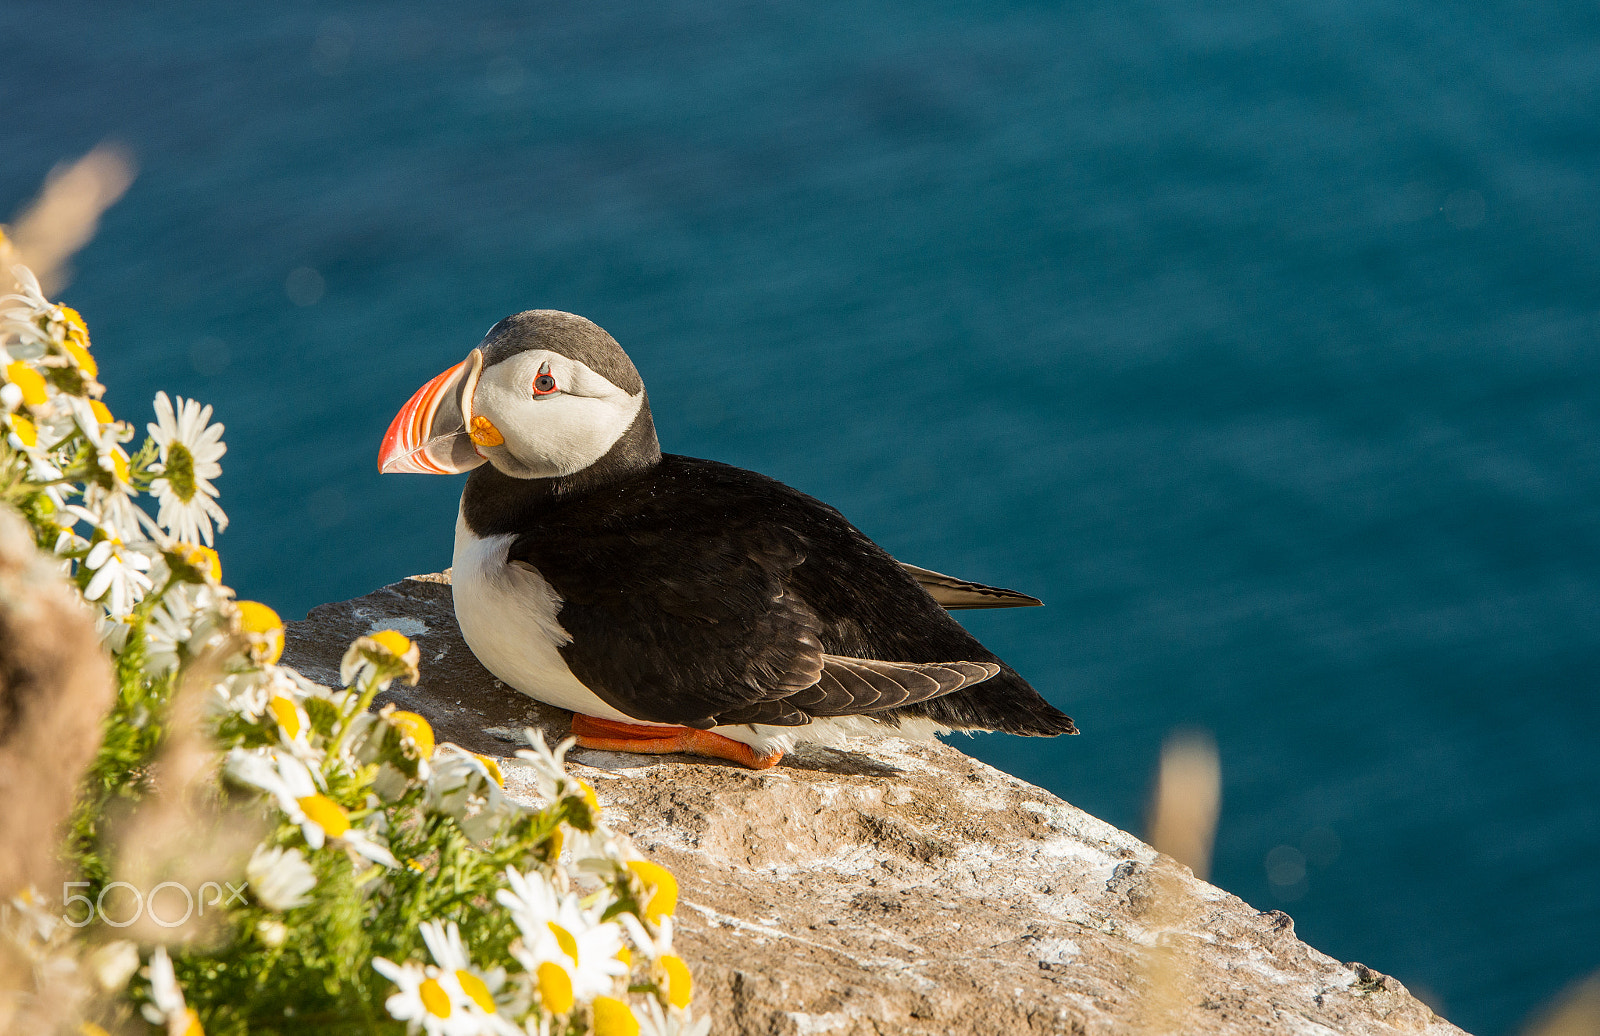 Nikon D600 sample photo. Cute common puffin bird in iceland photography